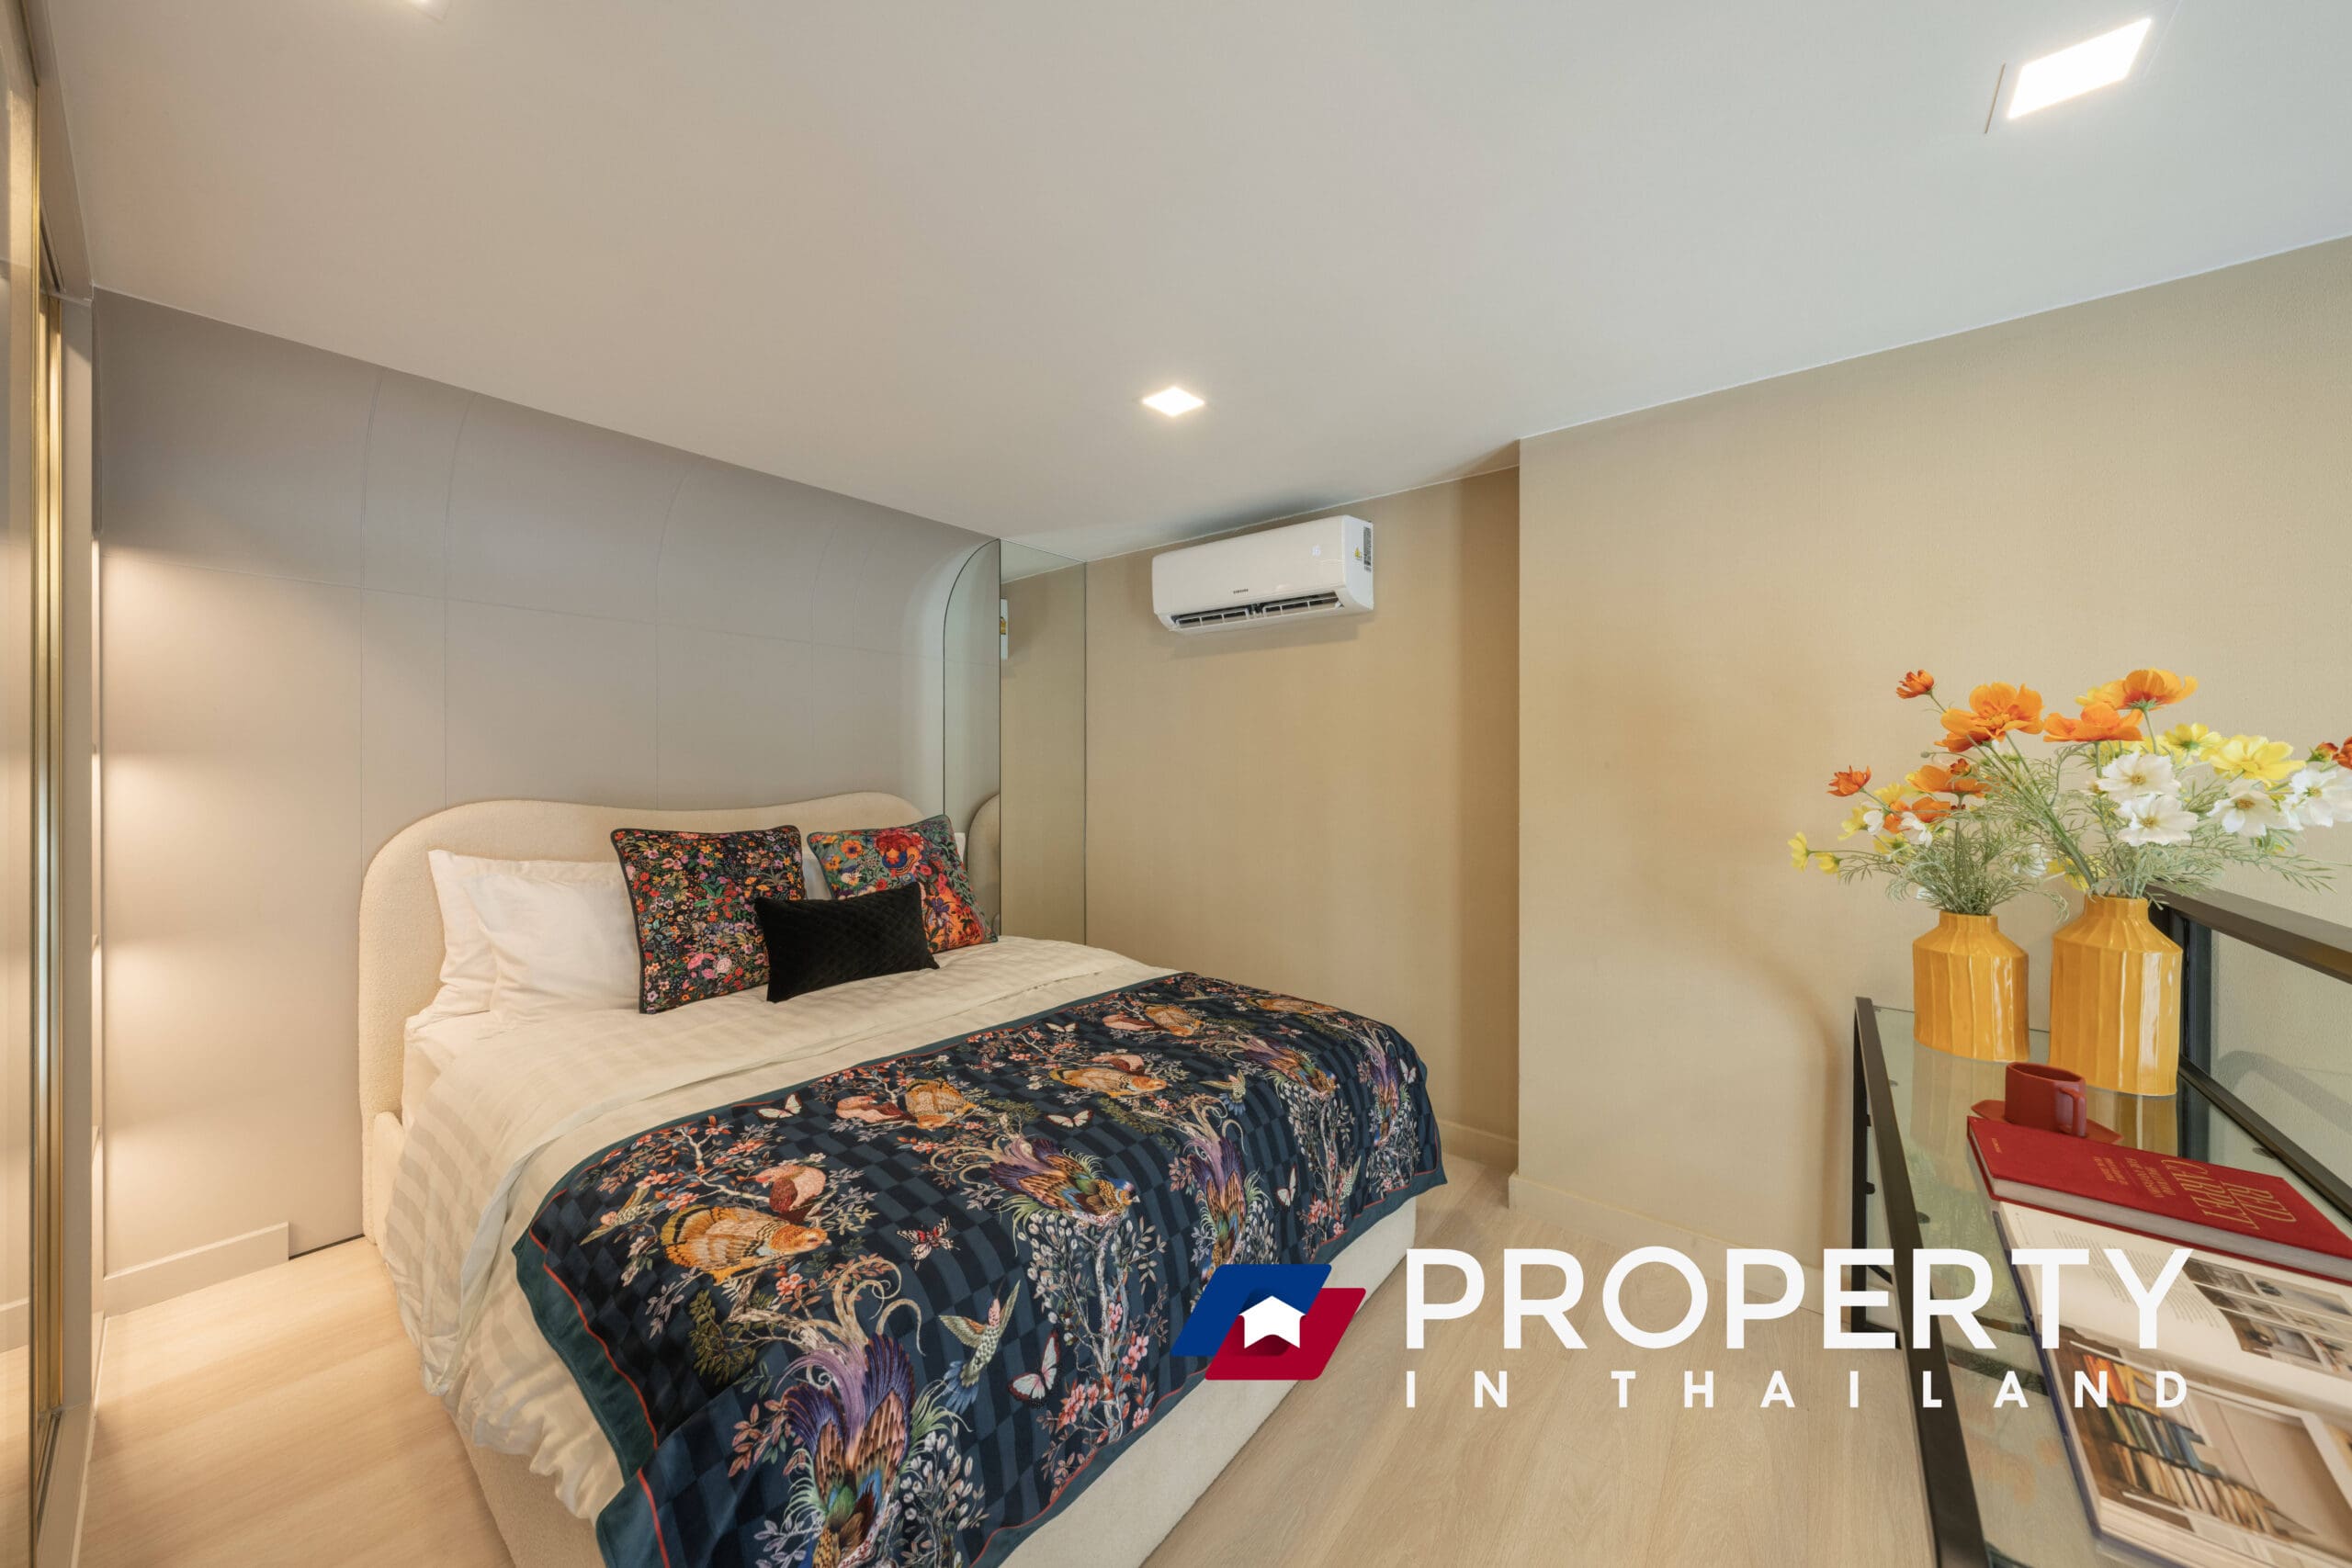 Bedroom in thailand property for sale